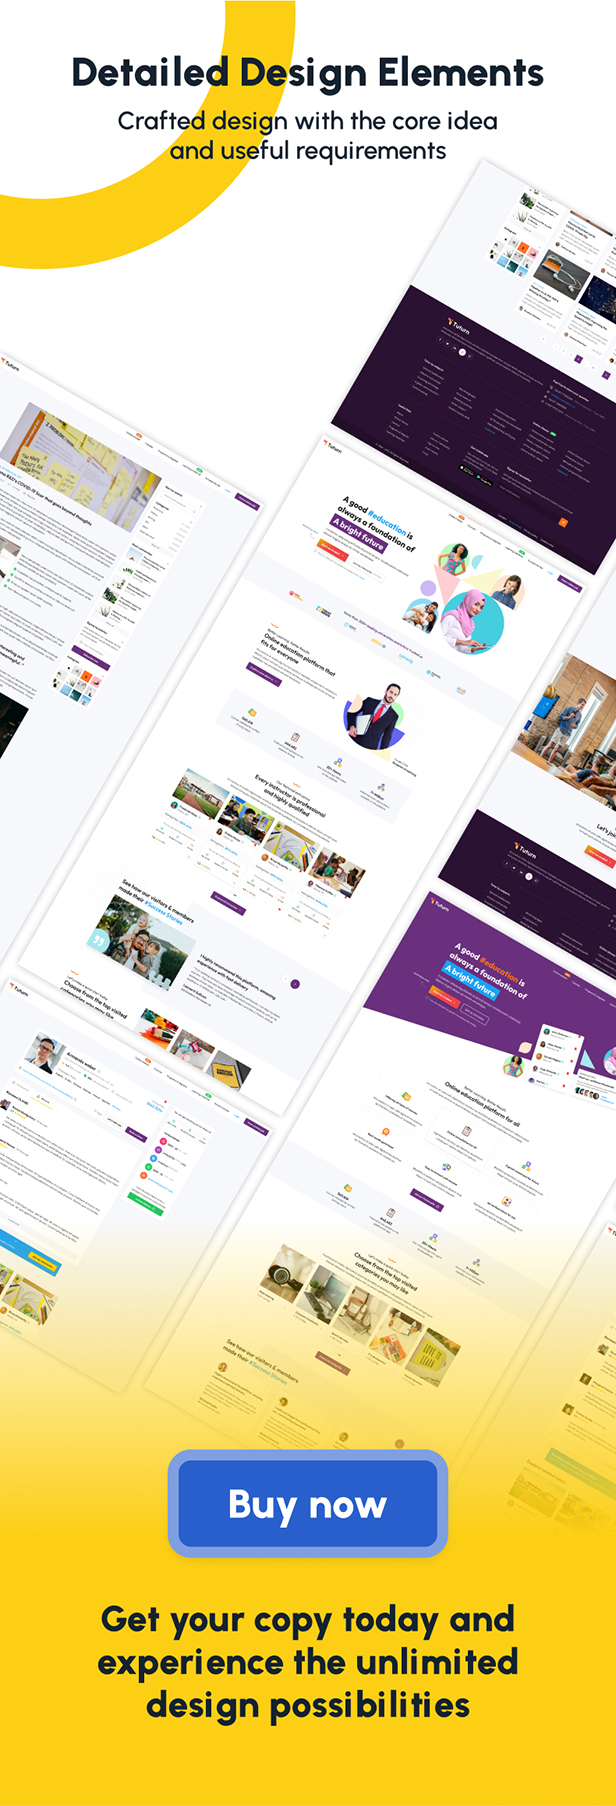 Tuturn - Online tuition and tutor marketplace figma template - 3